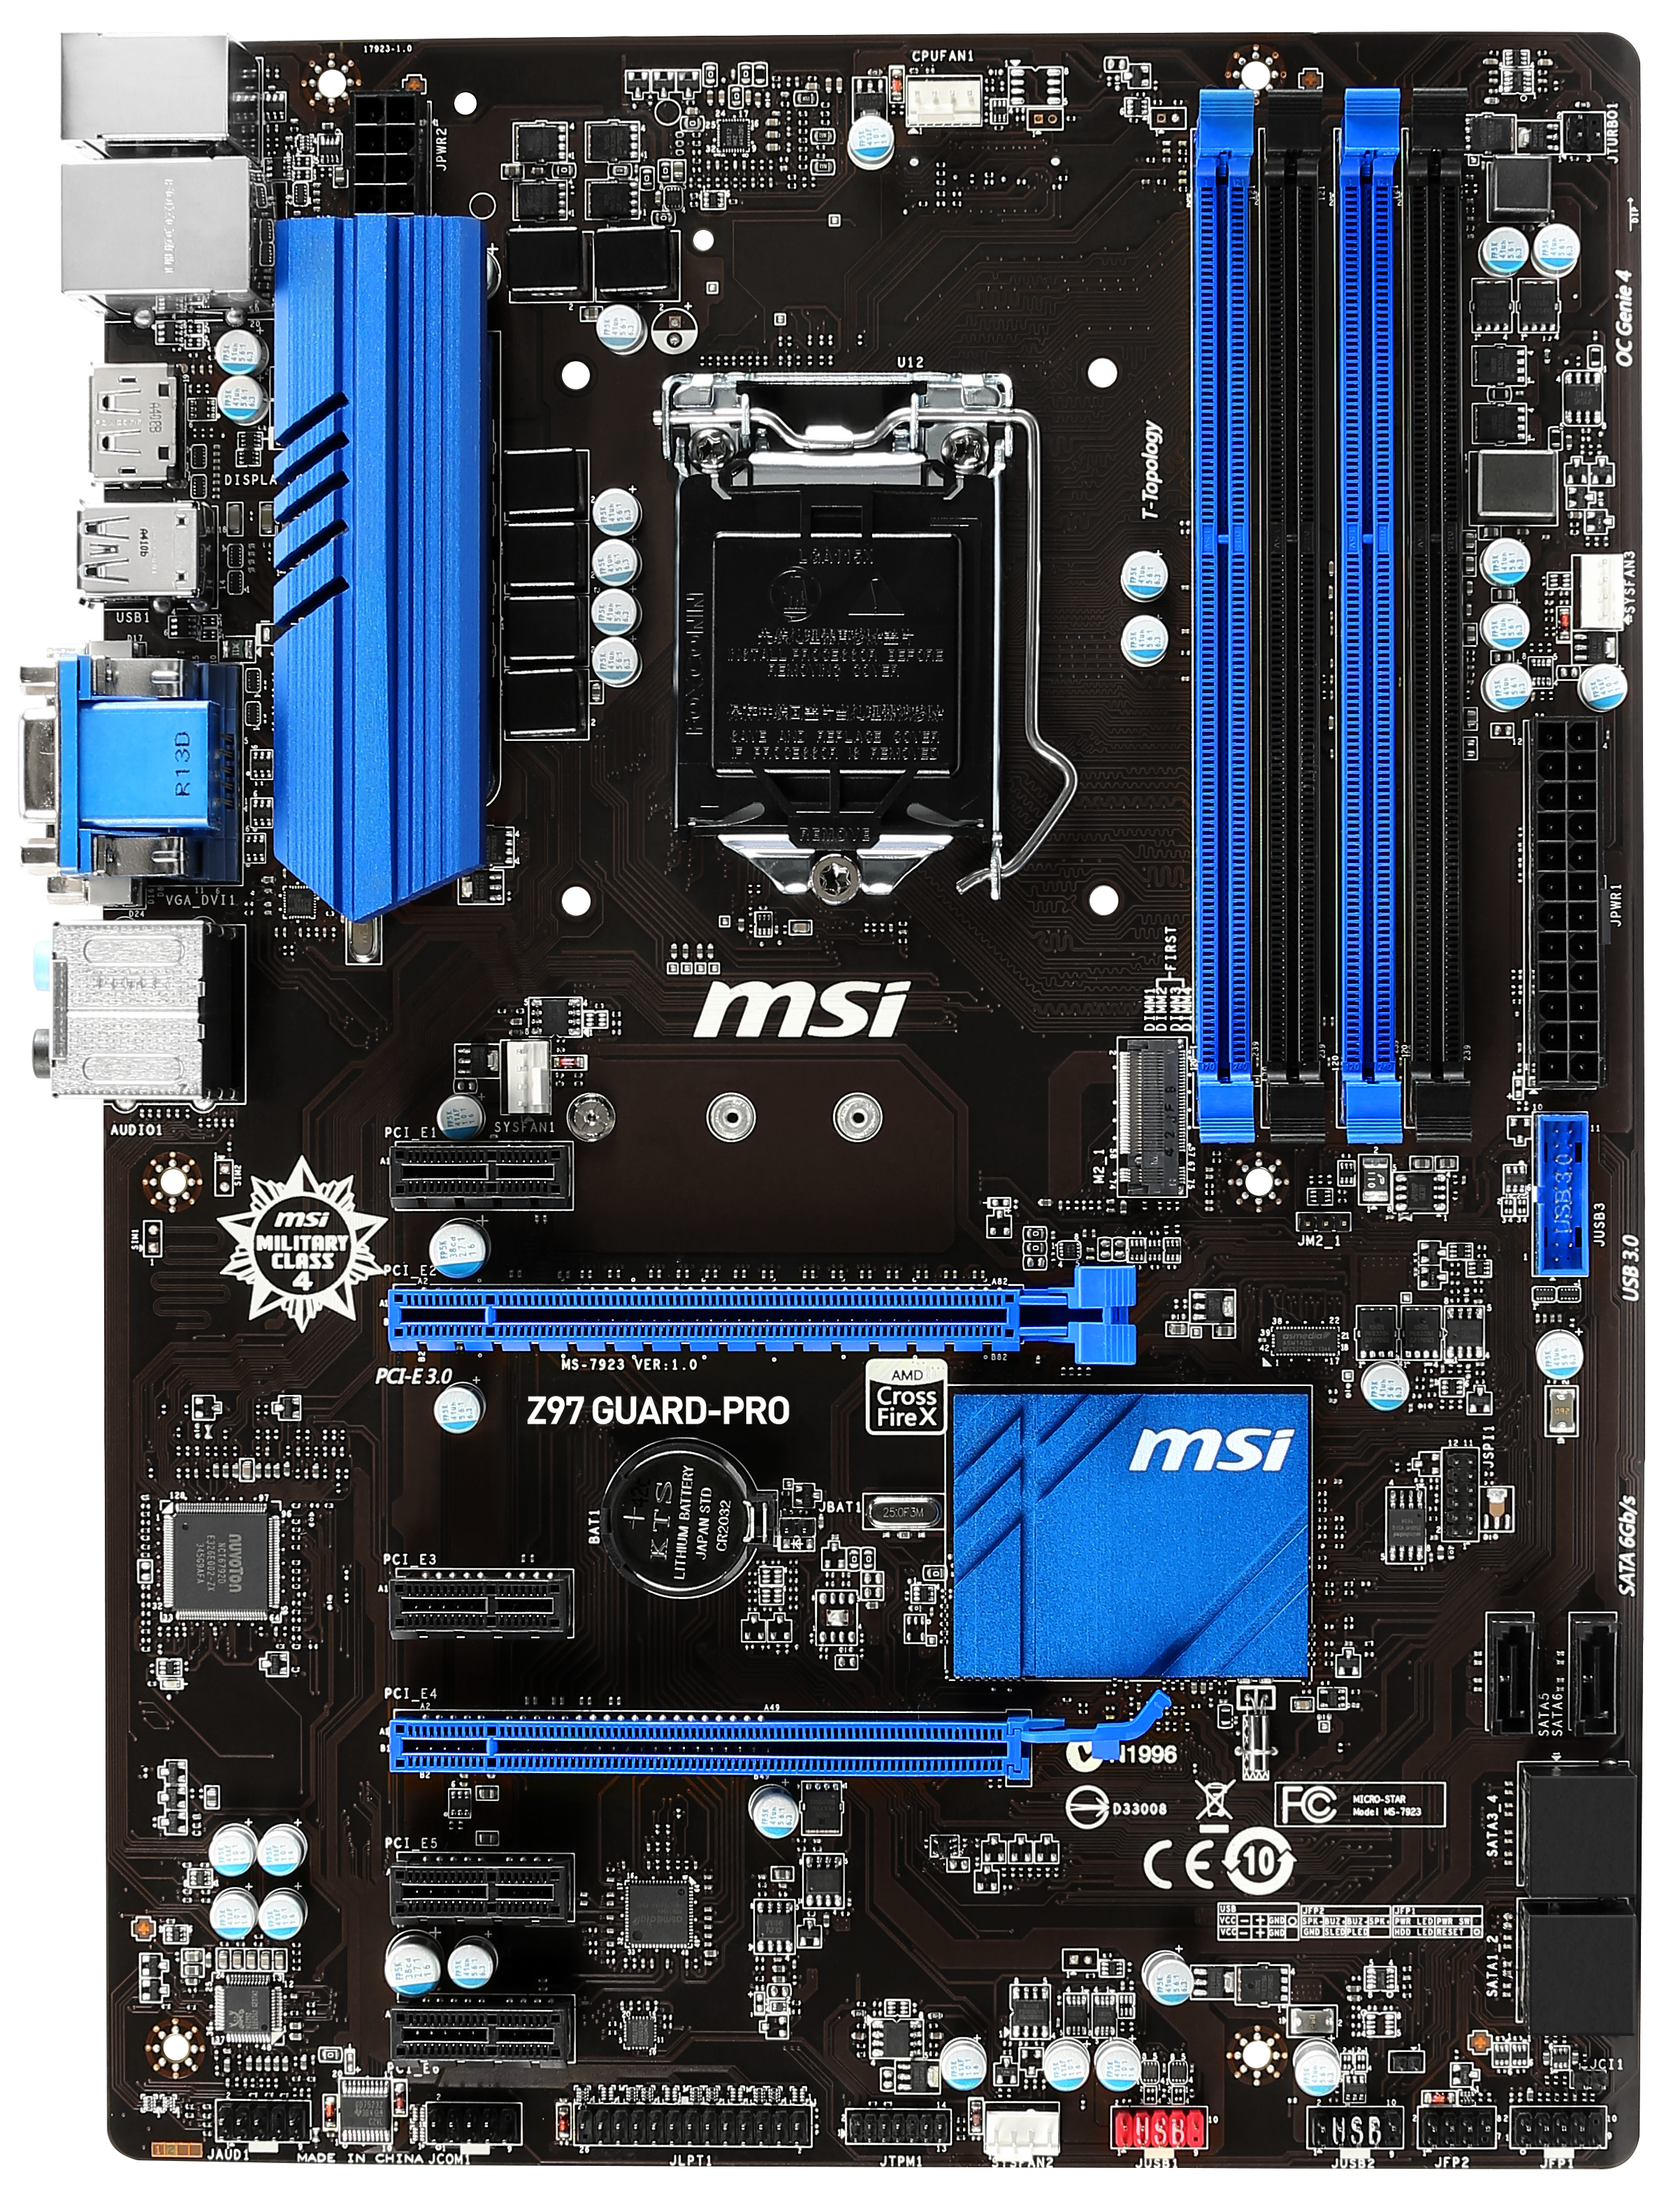 MSI Z97 Guard-Pro Review: Entry Level Z97 at $110